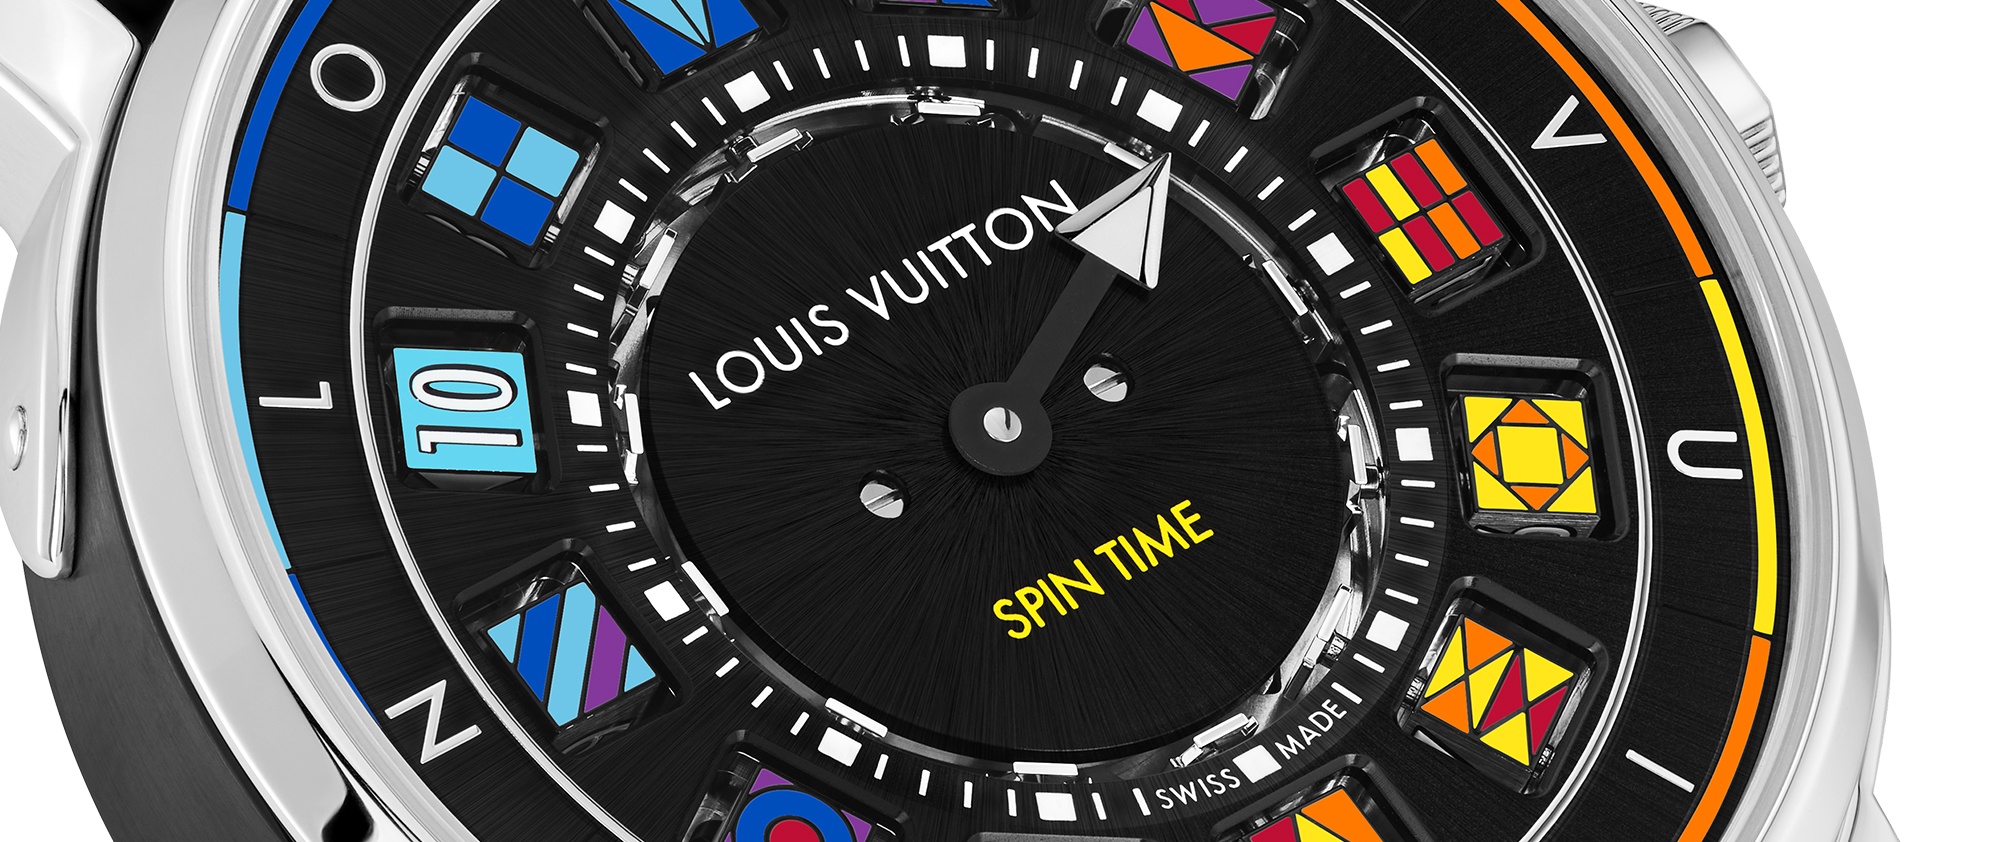 Only Watch 2017: Louis Vuitton Escale Spin Time Black & Fire –   – Featuring Watch Reviews, Critiques, Reports & News